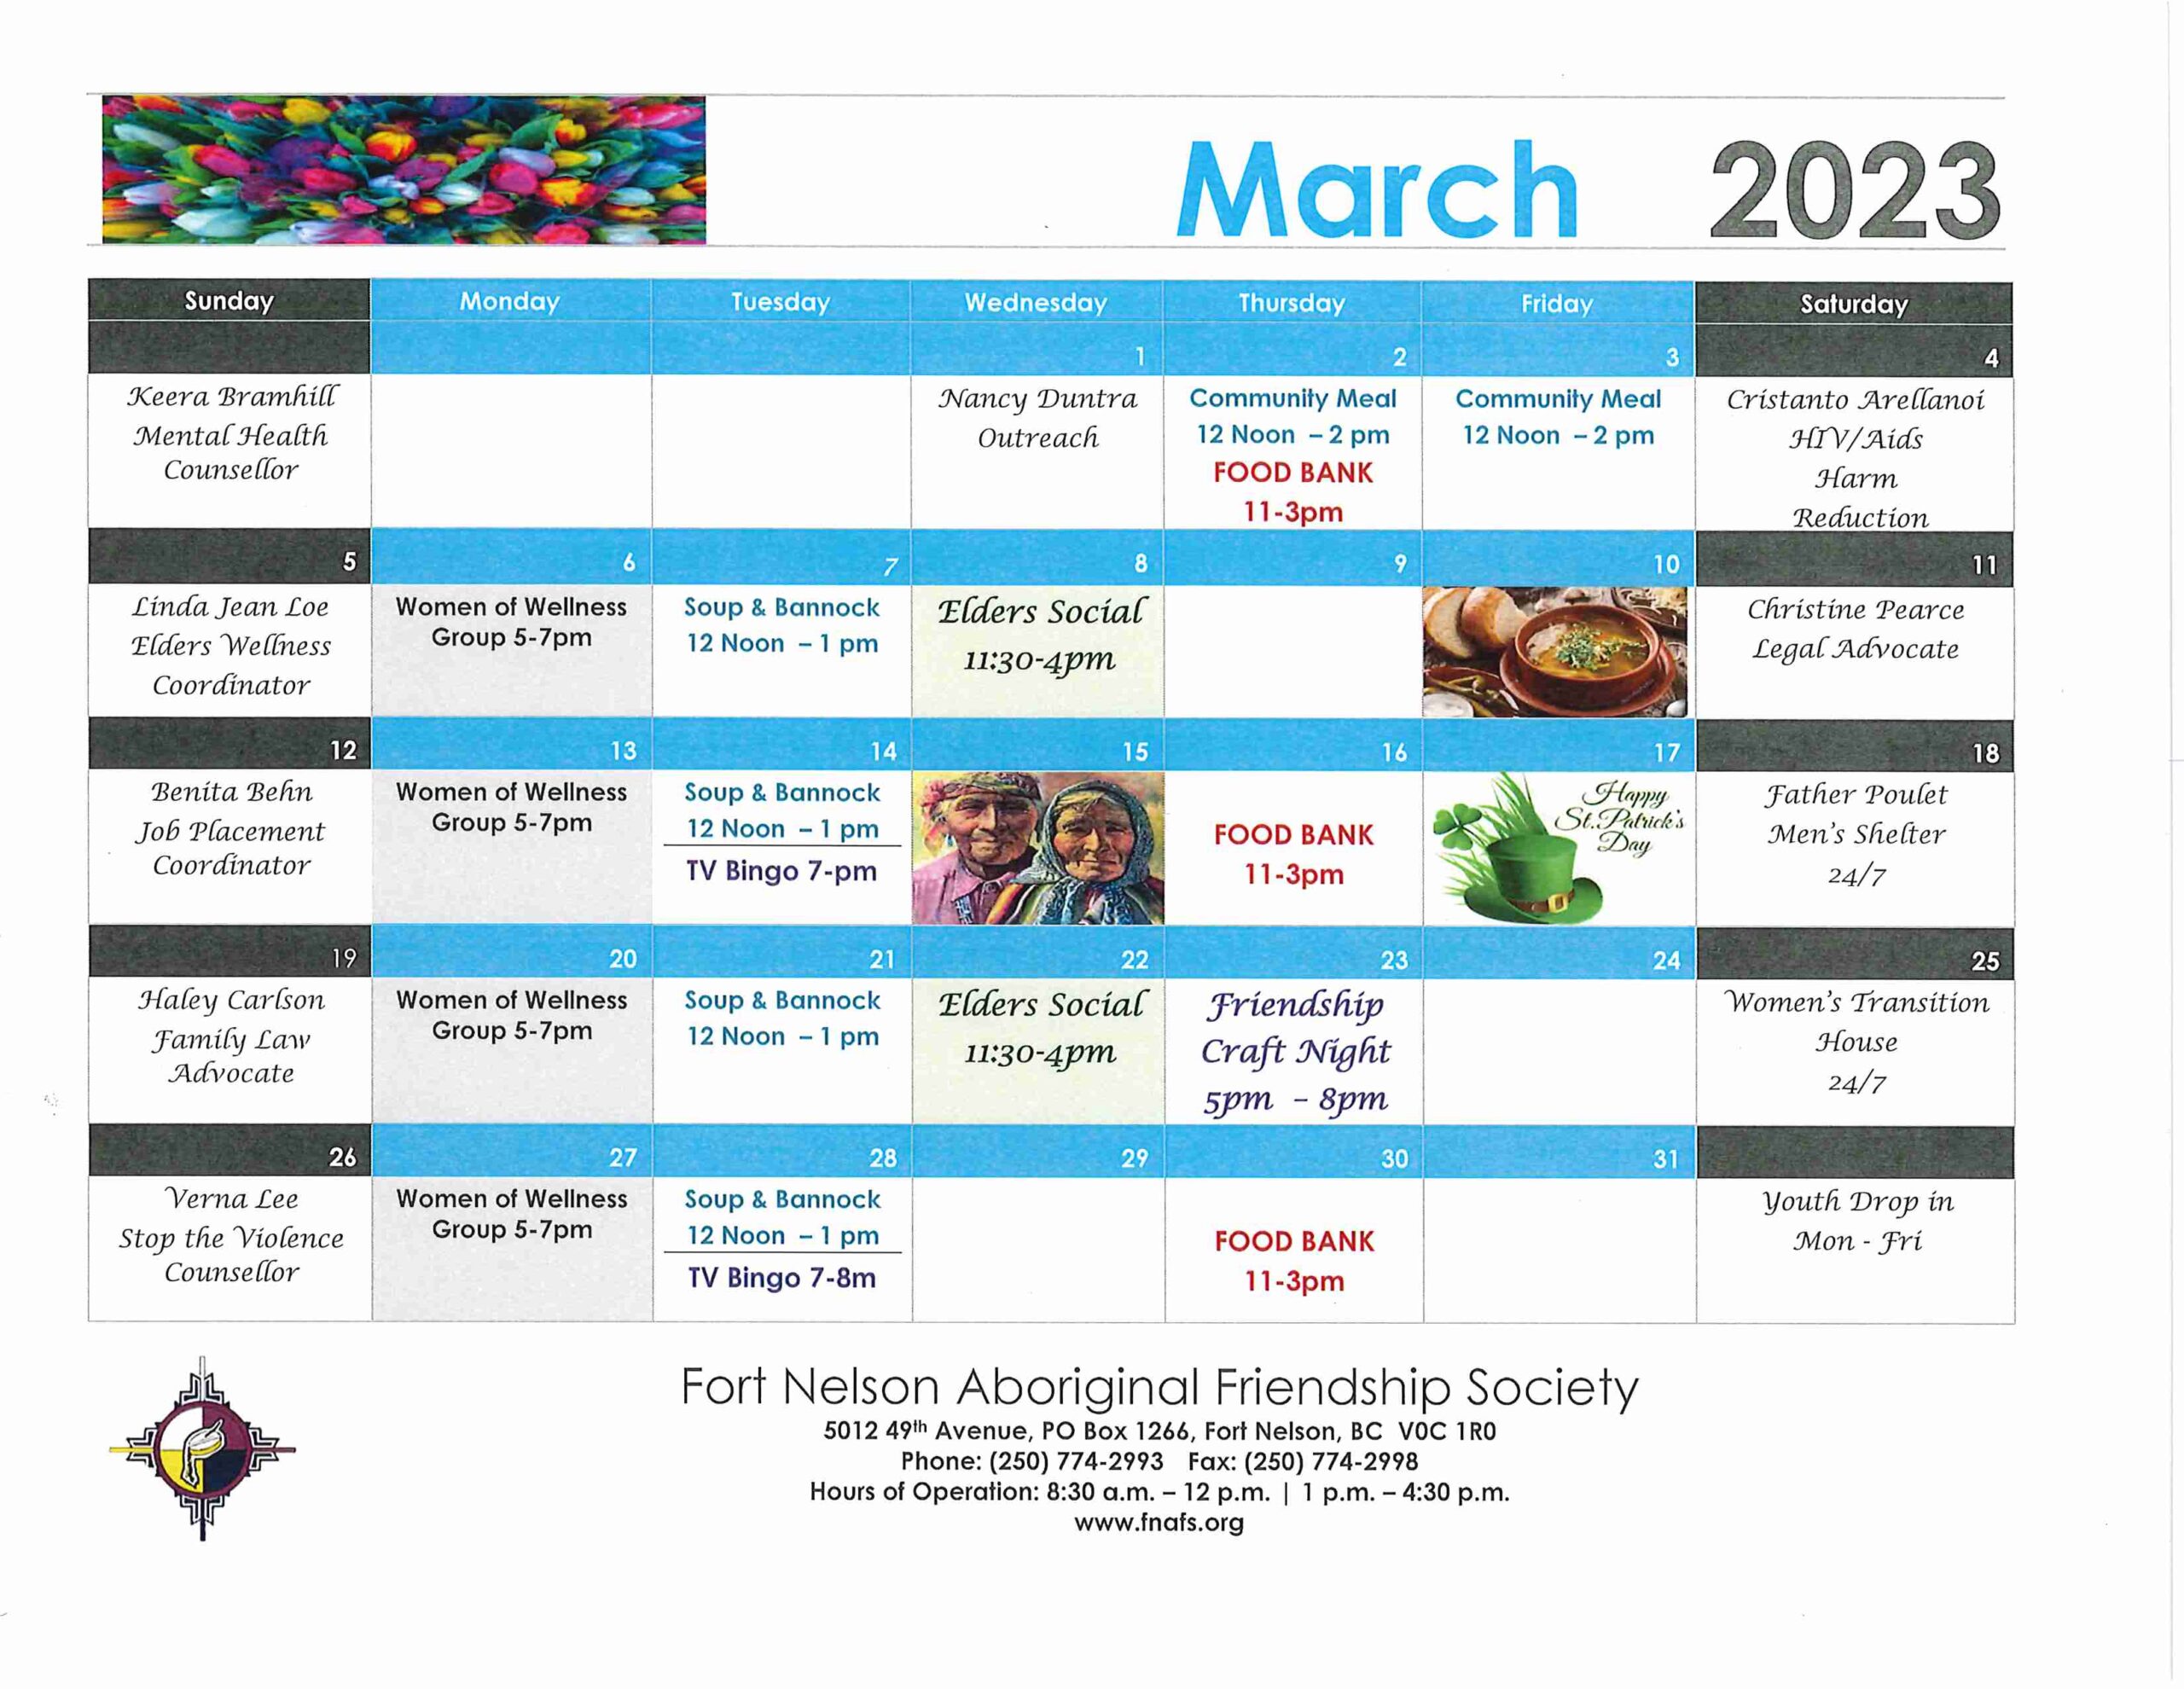 March 2023 calendar of events